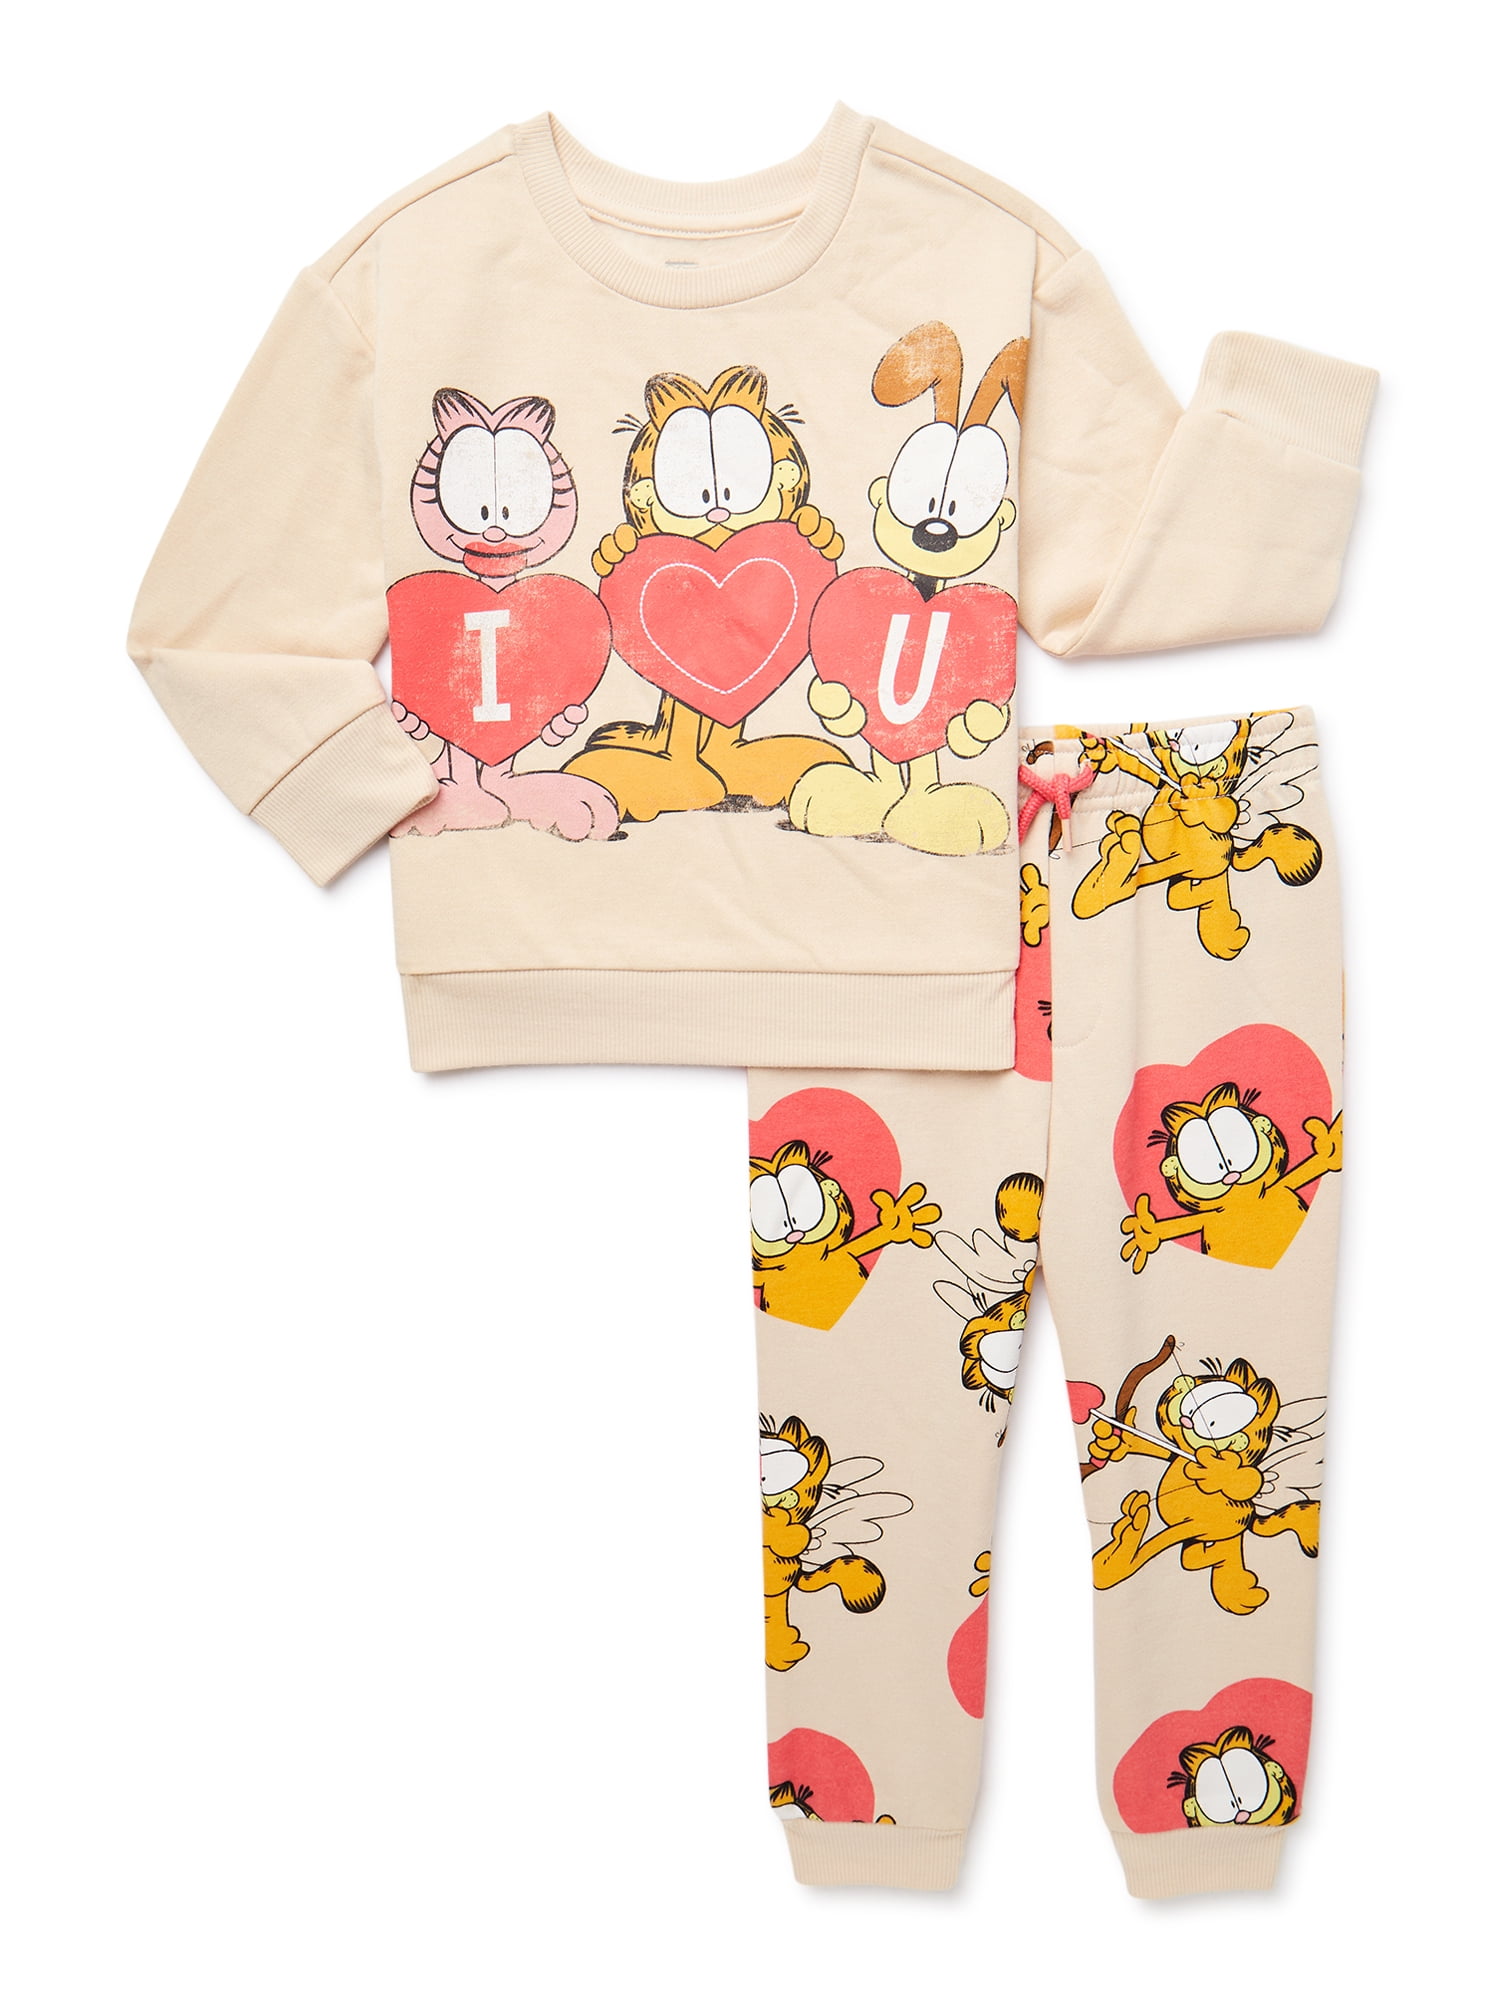 Day 12M-5T Joggers 2-Piece, Sweatshirt Crewneck Toddler Set, Valentine\'s Sweethearts Sweethearts Sizes and